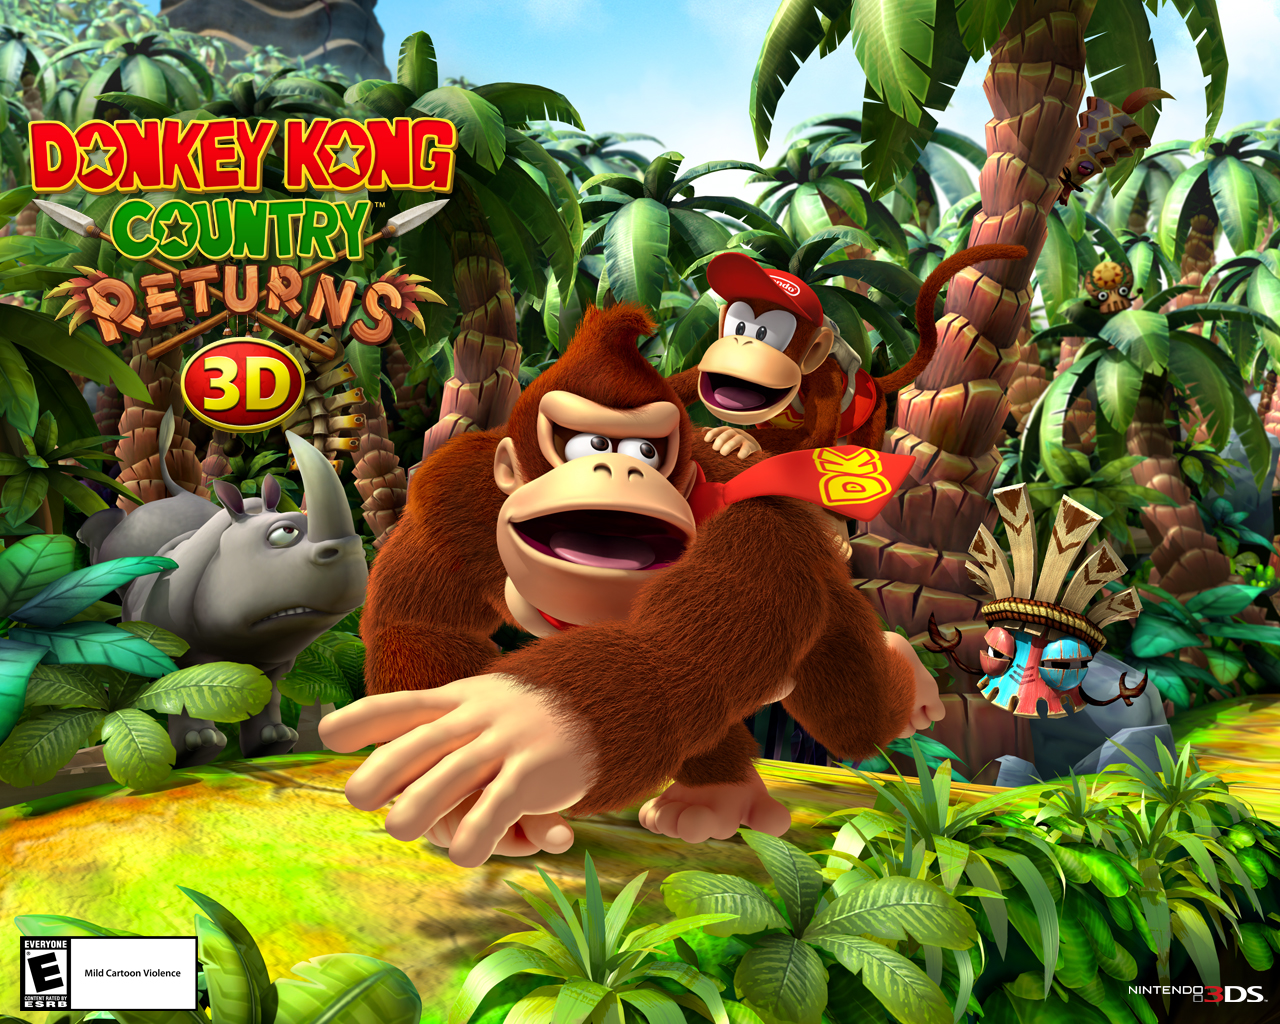 Wallpapers - Donkey Kong Country Returns 3D for Nintendo 3DS